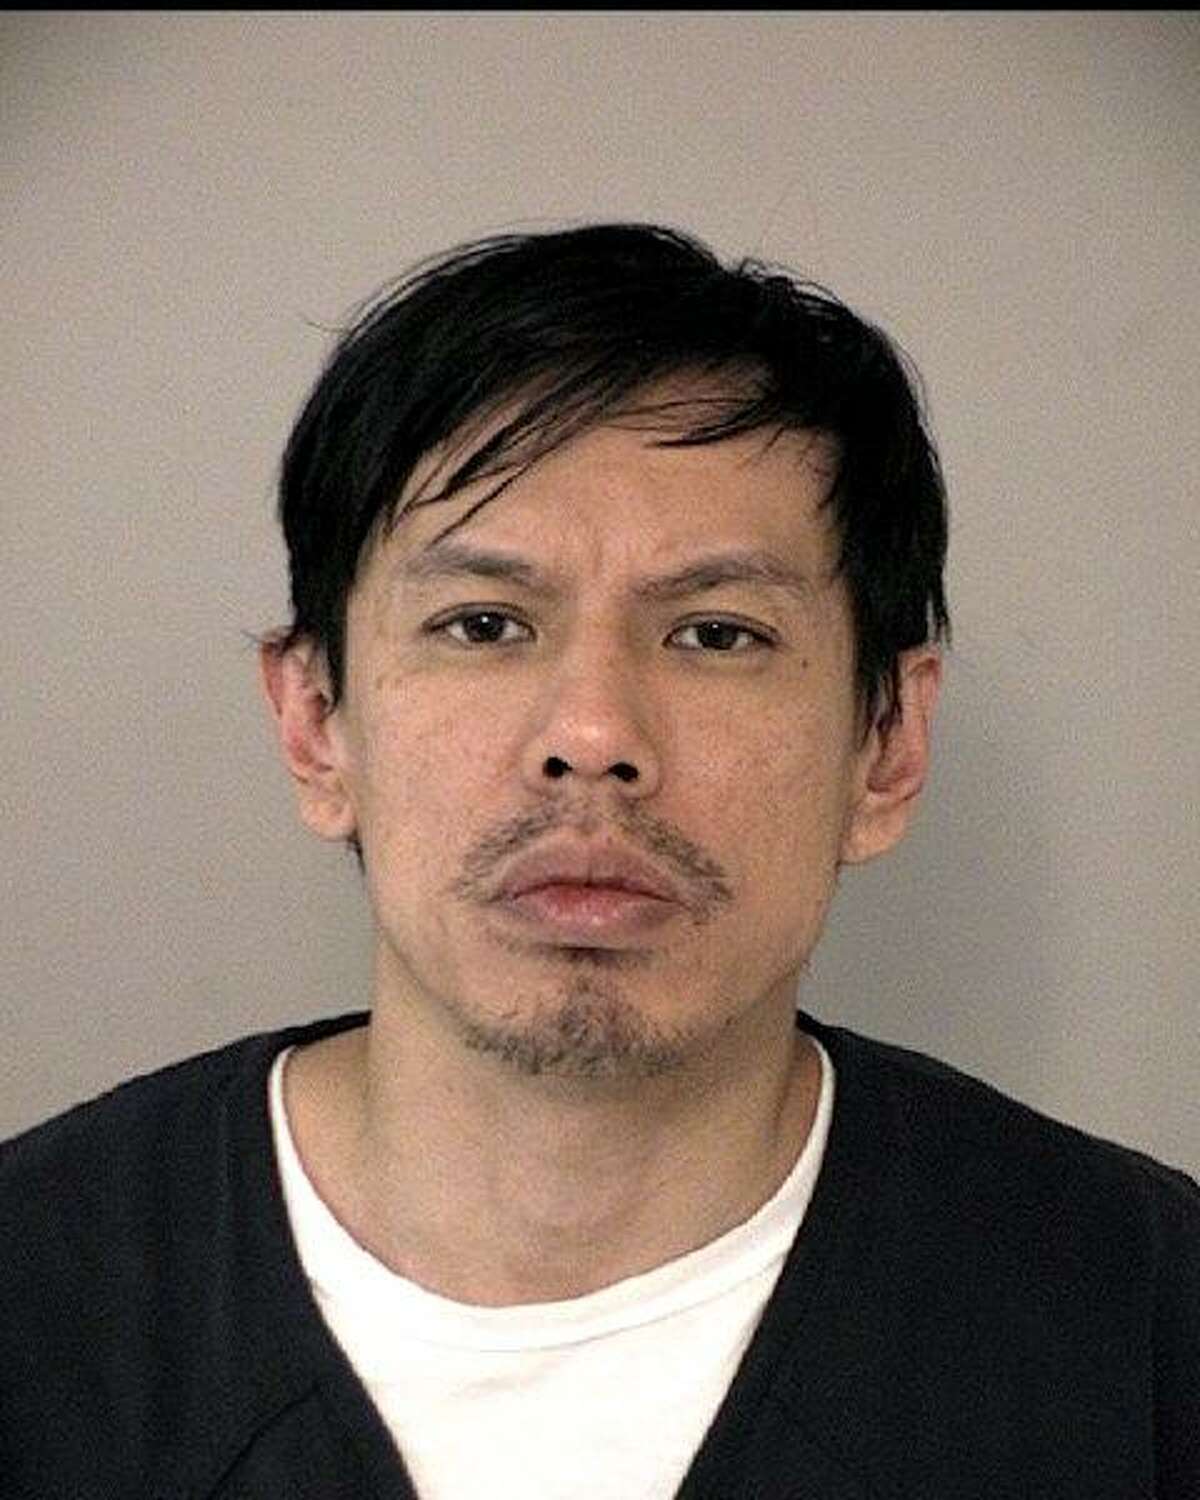 Fort Bend resident Quang Do, 41, received 35 years in prison for killing his wife.